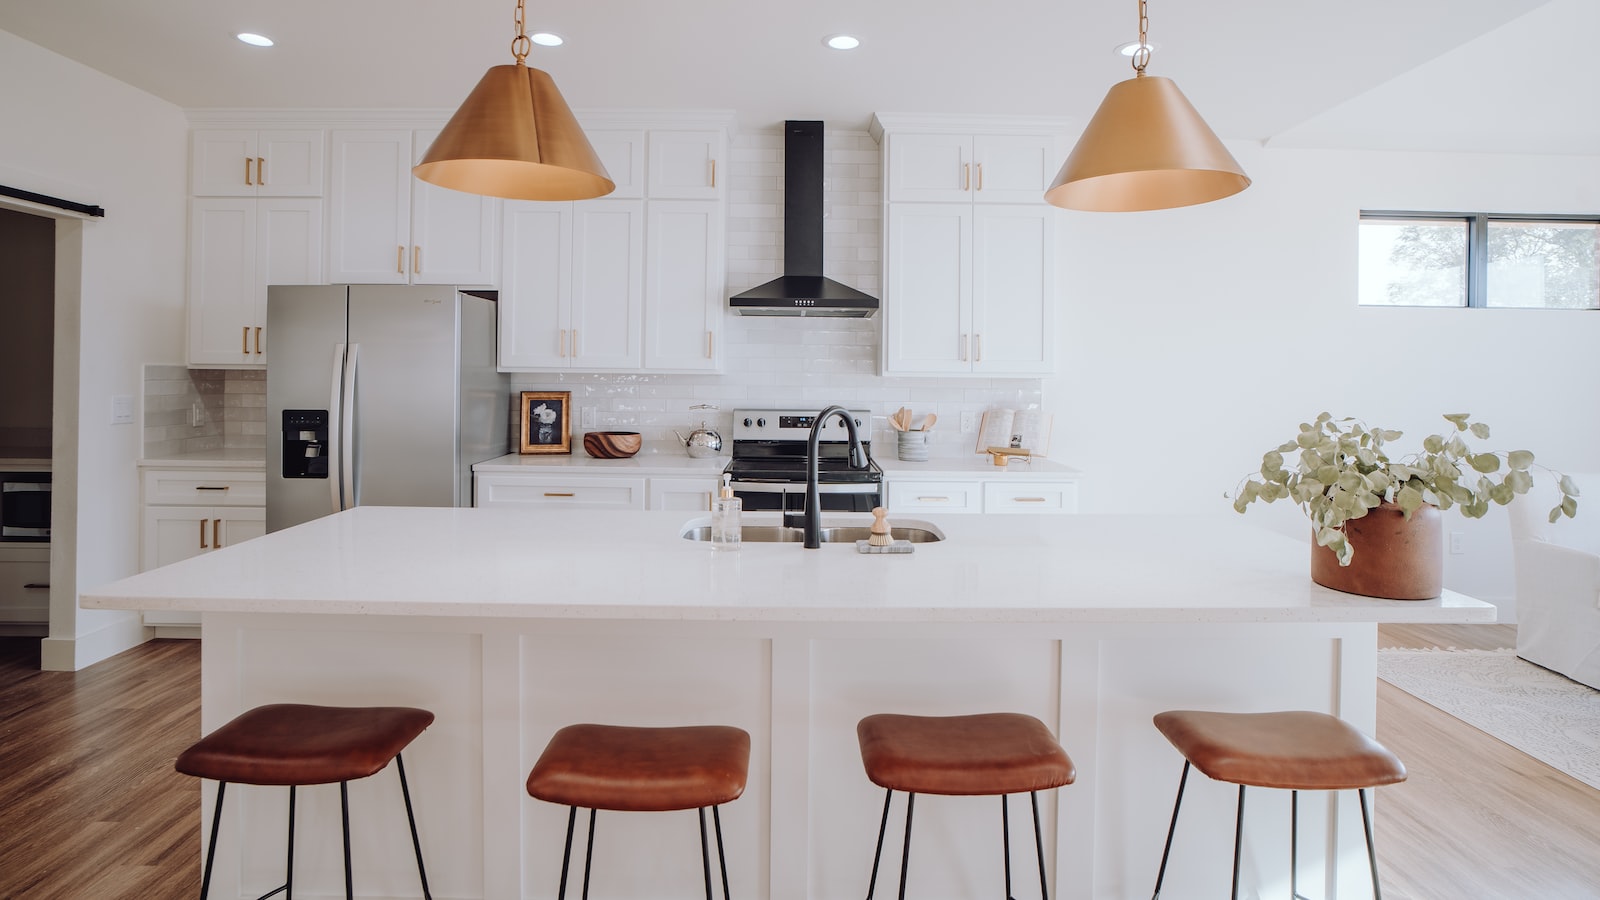 Making Ethical and Eco-Friendly Choices ​for Your Kitchen Renovation Project